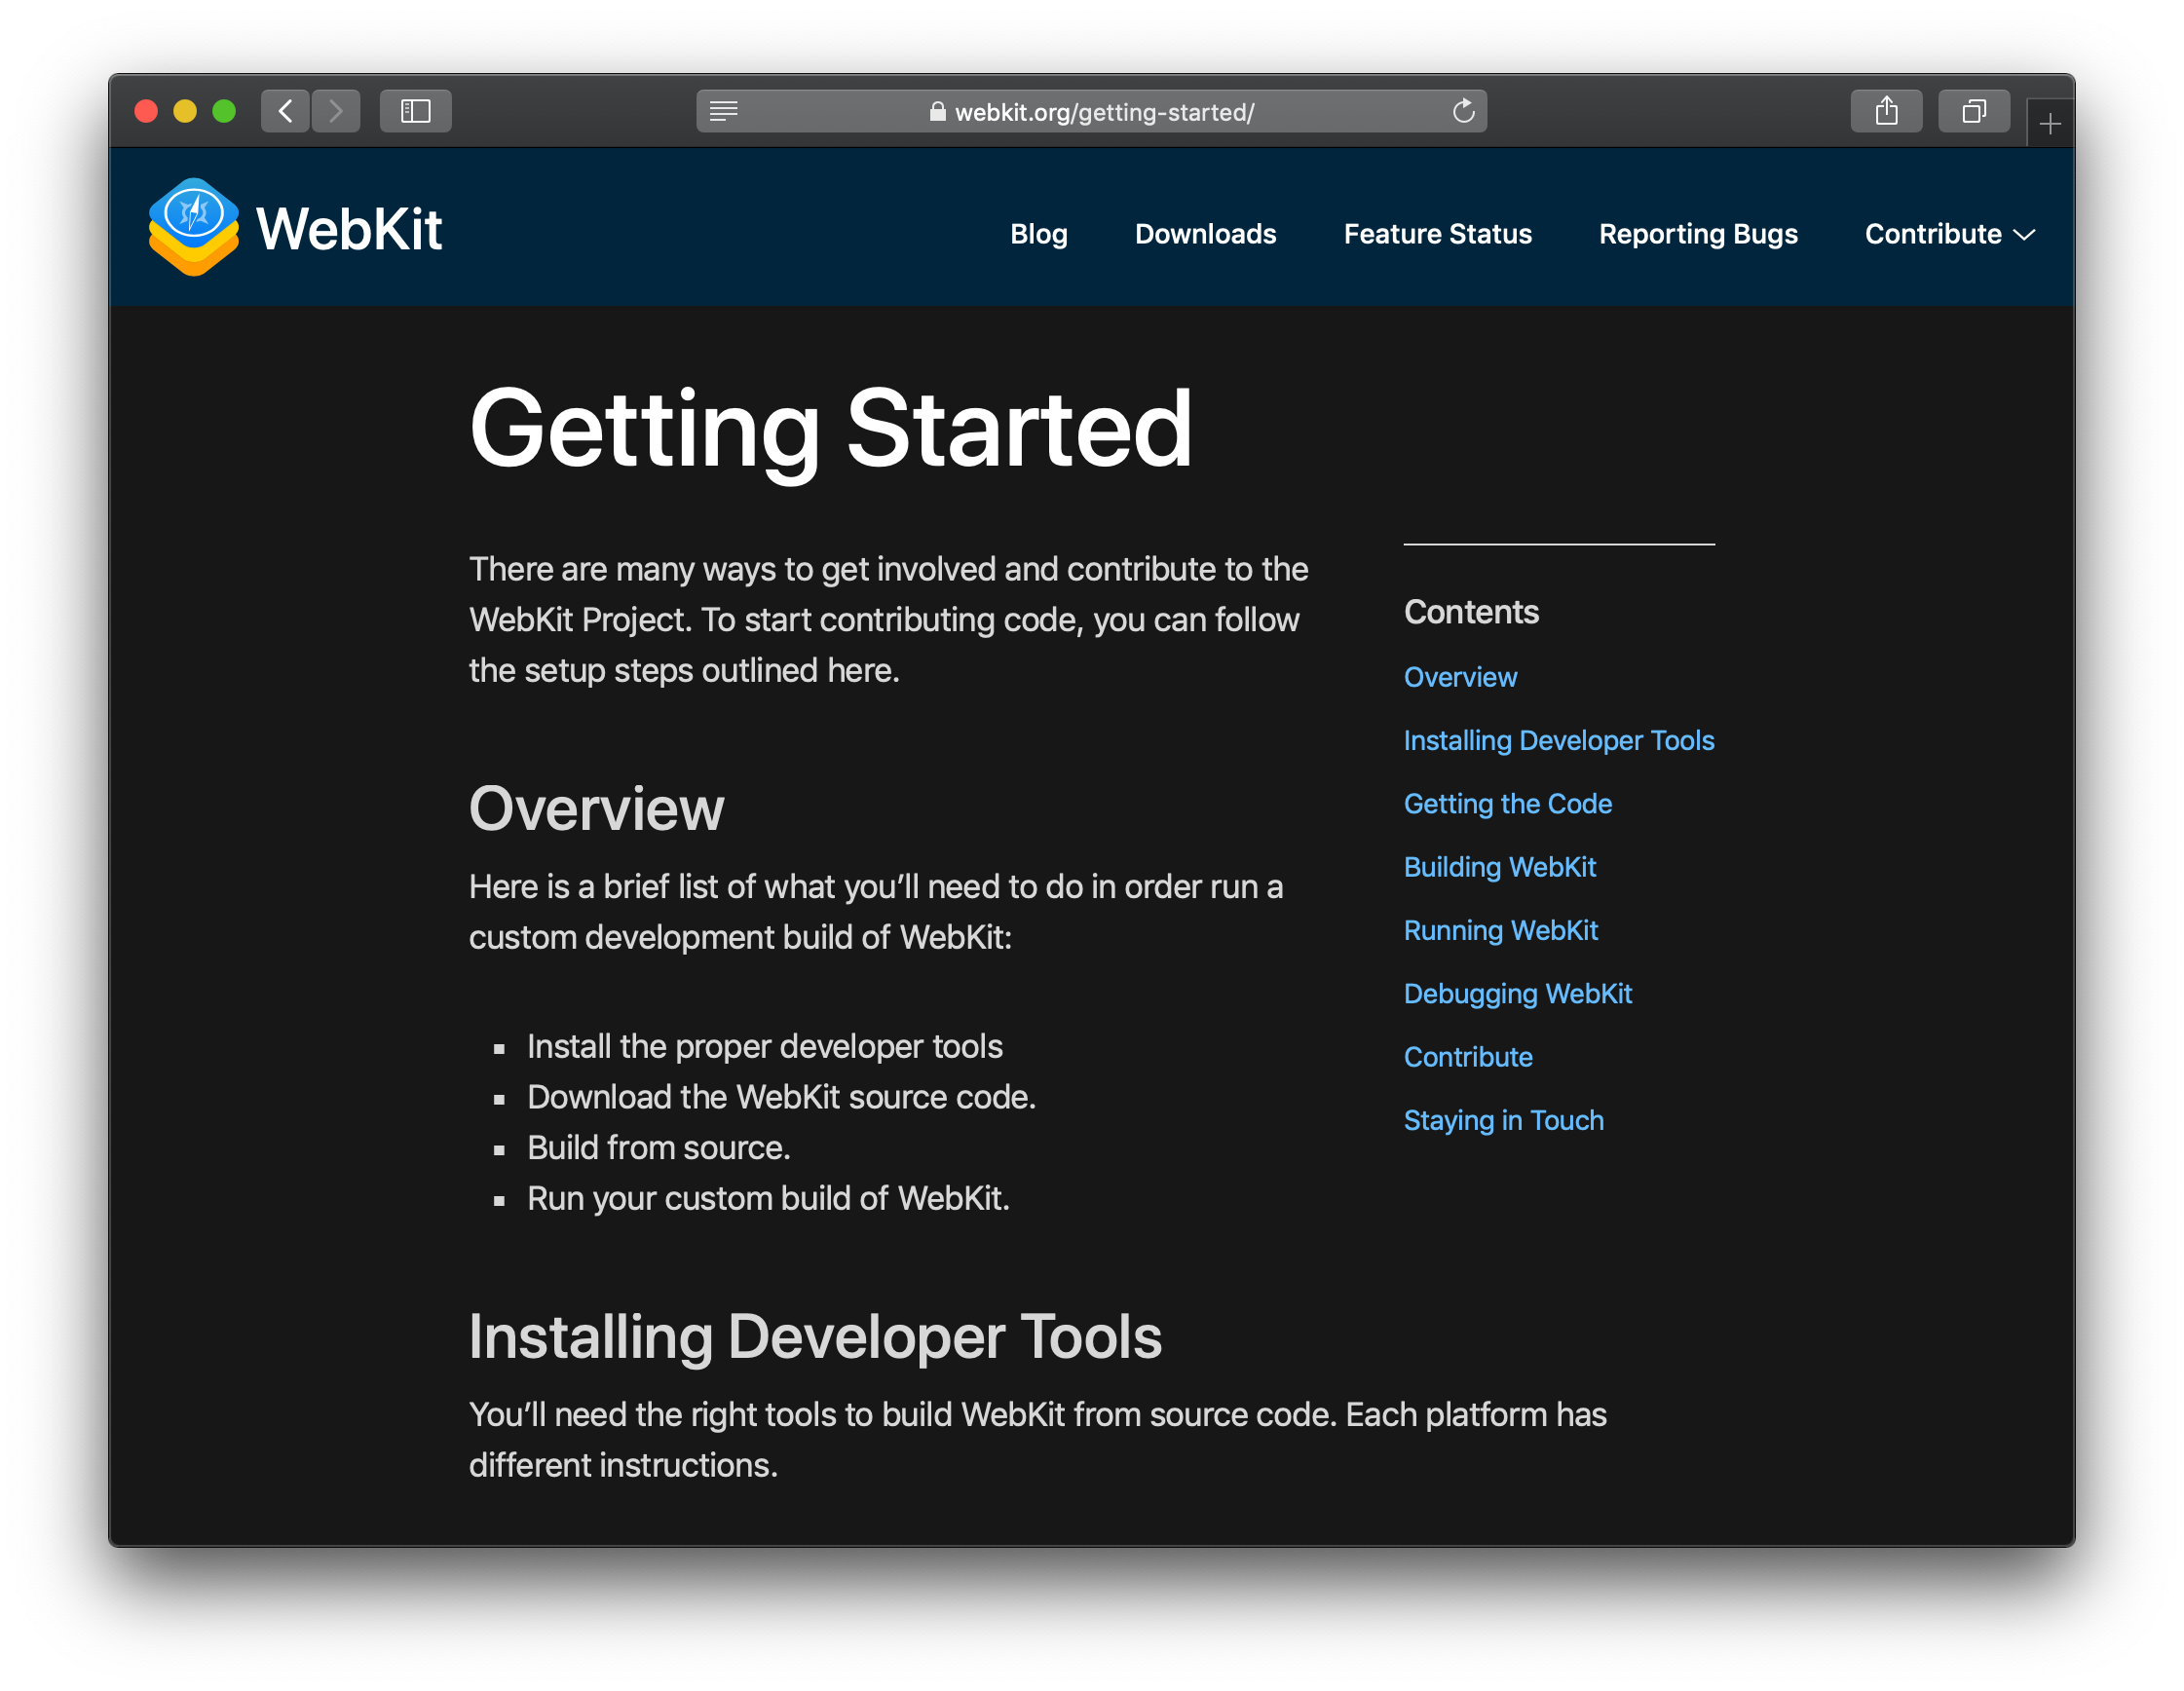 WebKit.org Getting Started page shown in dark mode